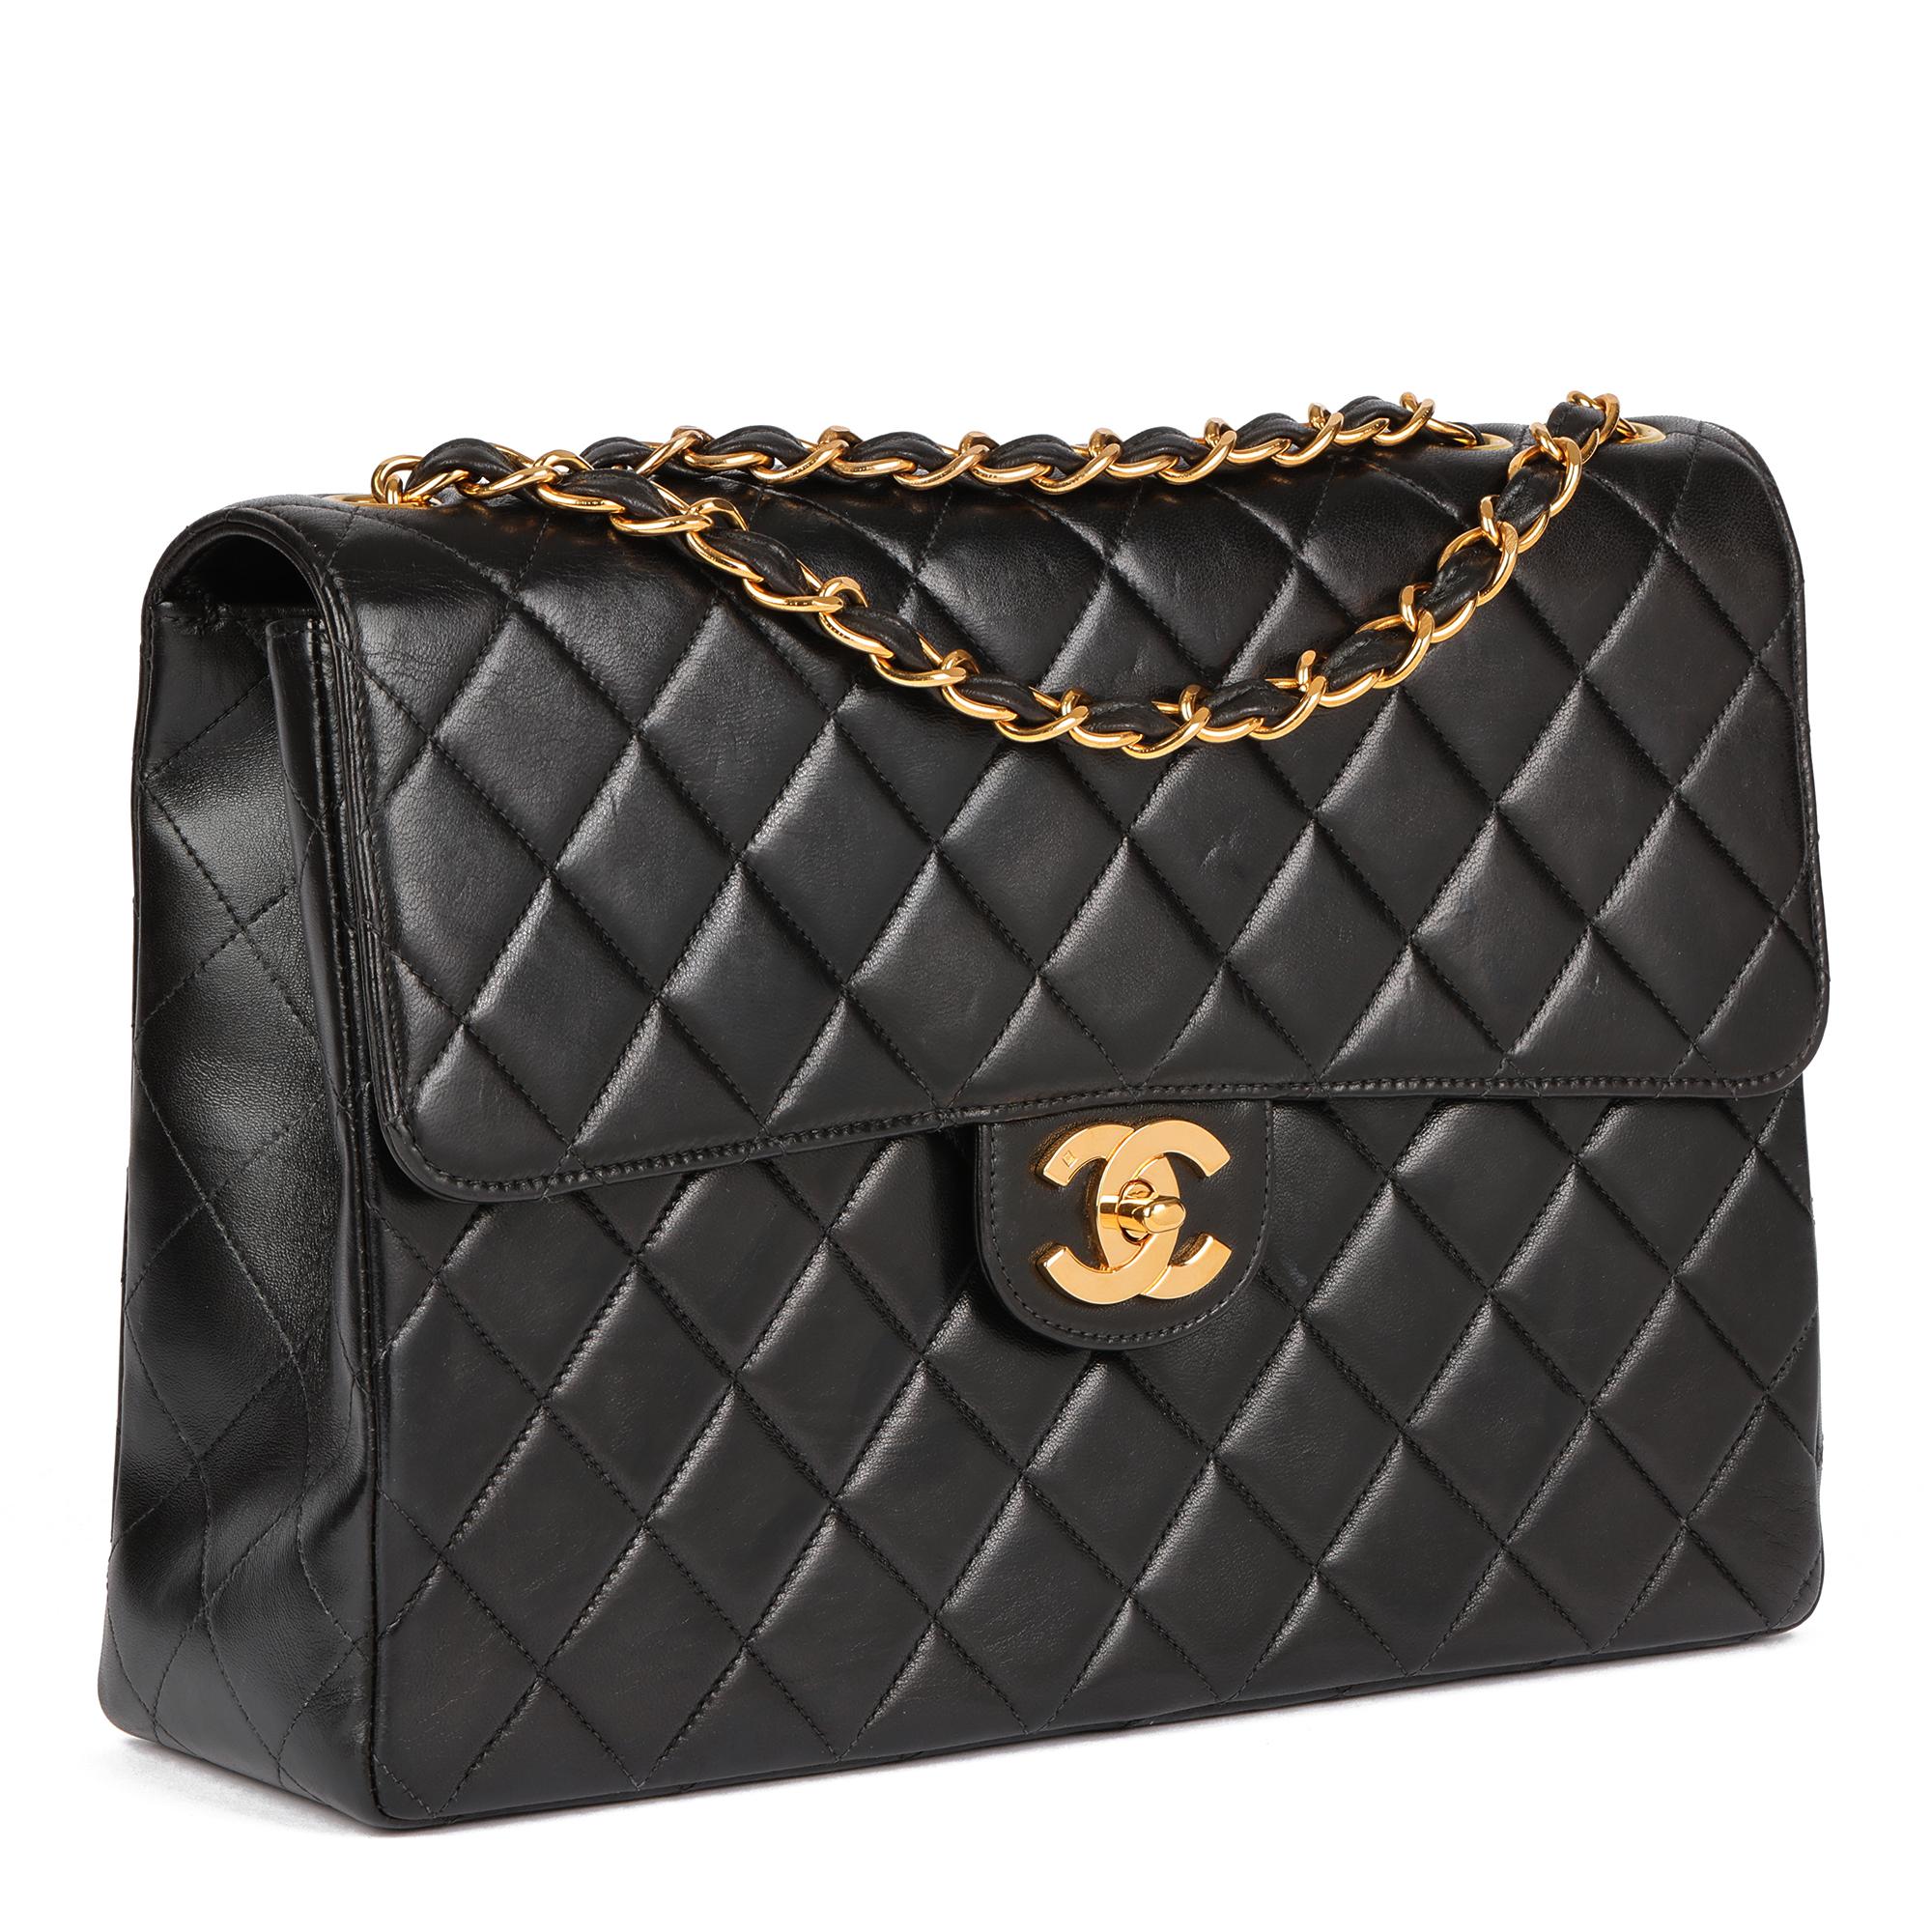 CHANEL
Black Quilted Lambskin Vintage Jumbo XL Classic Single Flap Bag

Serial Number: 4325606
Age (Circa): 1996
Accompanied By: Chanel Care Booklet, Authenticity Card
Authenticity Details: Authenticity Card, Serial Sticker (Made in France)
Gender: